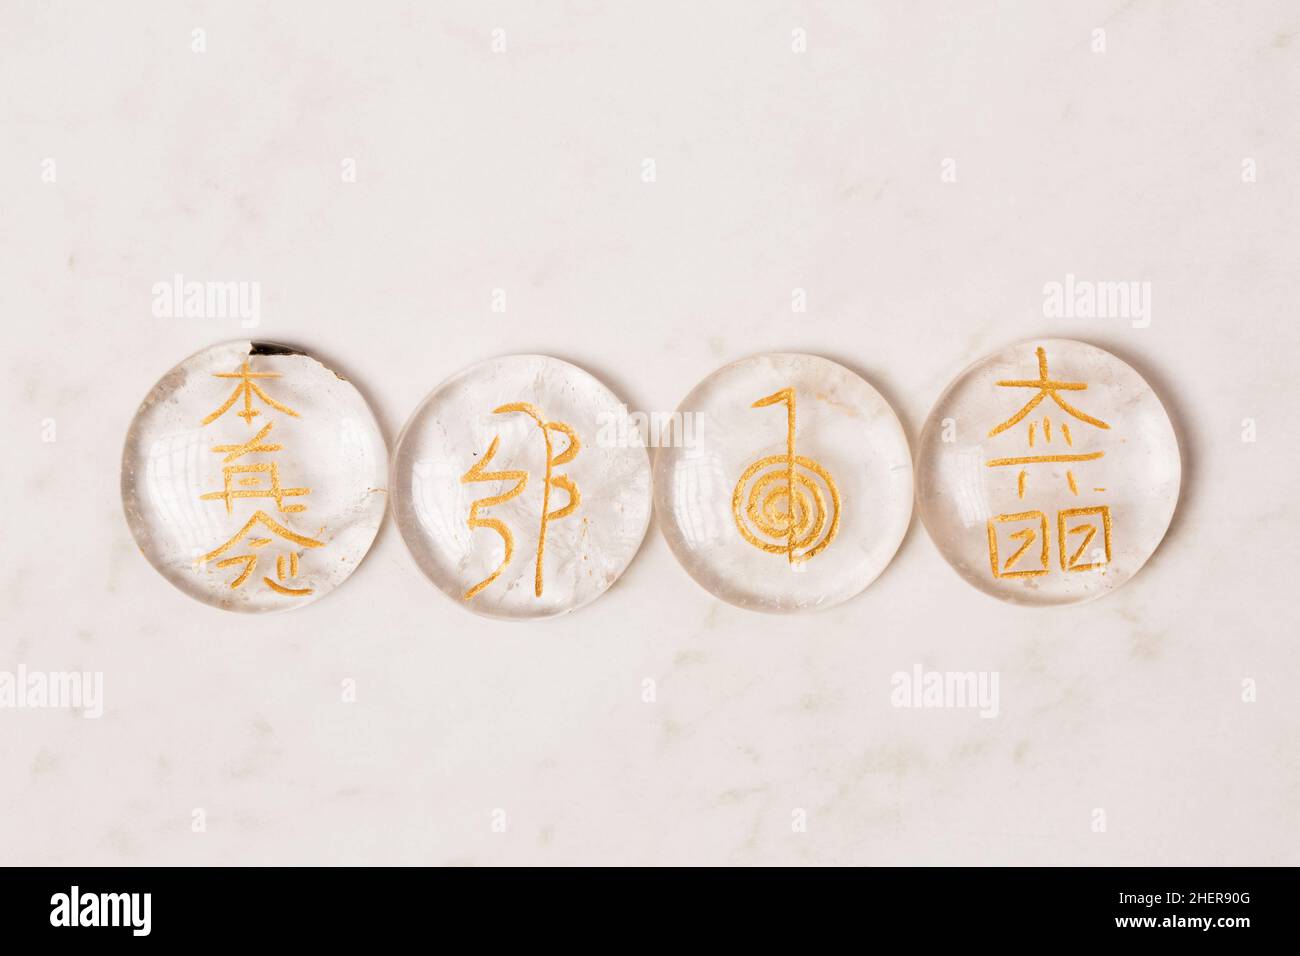 second level Reiki signs on rock crystal Stock Photo